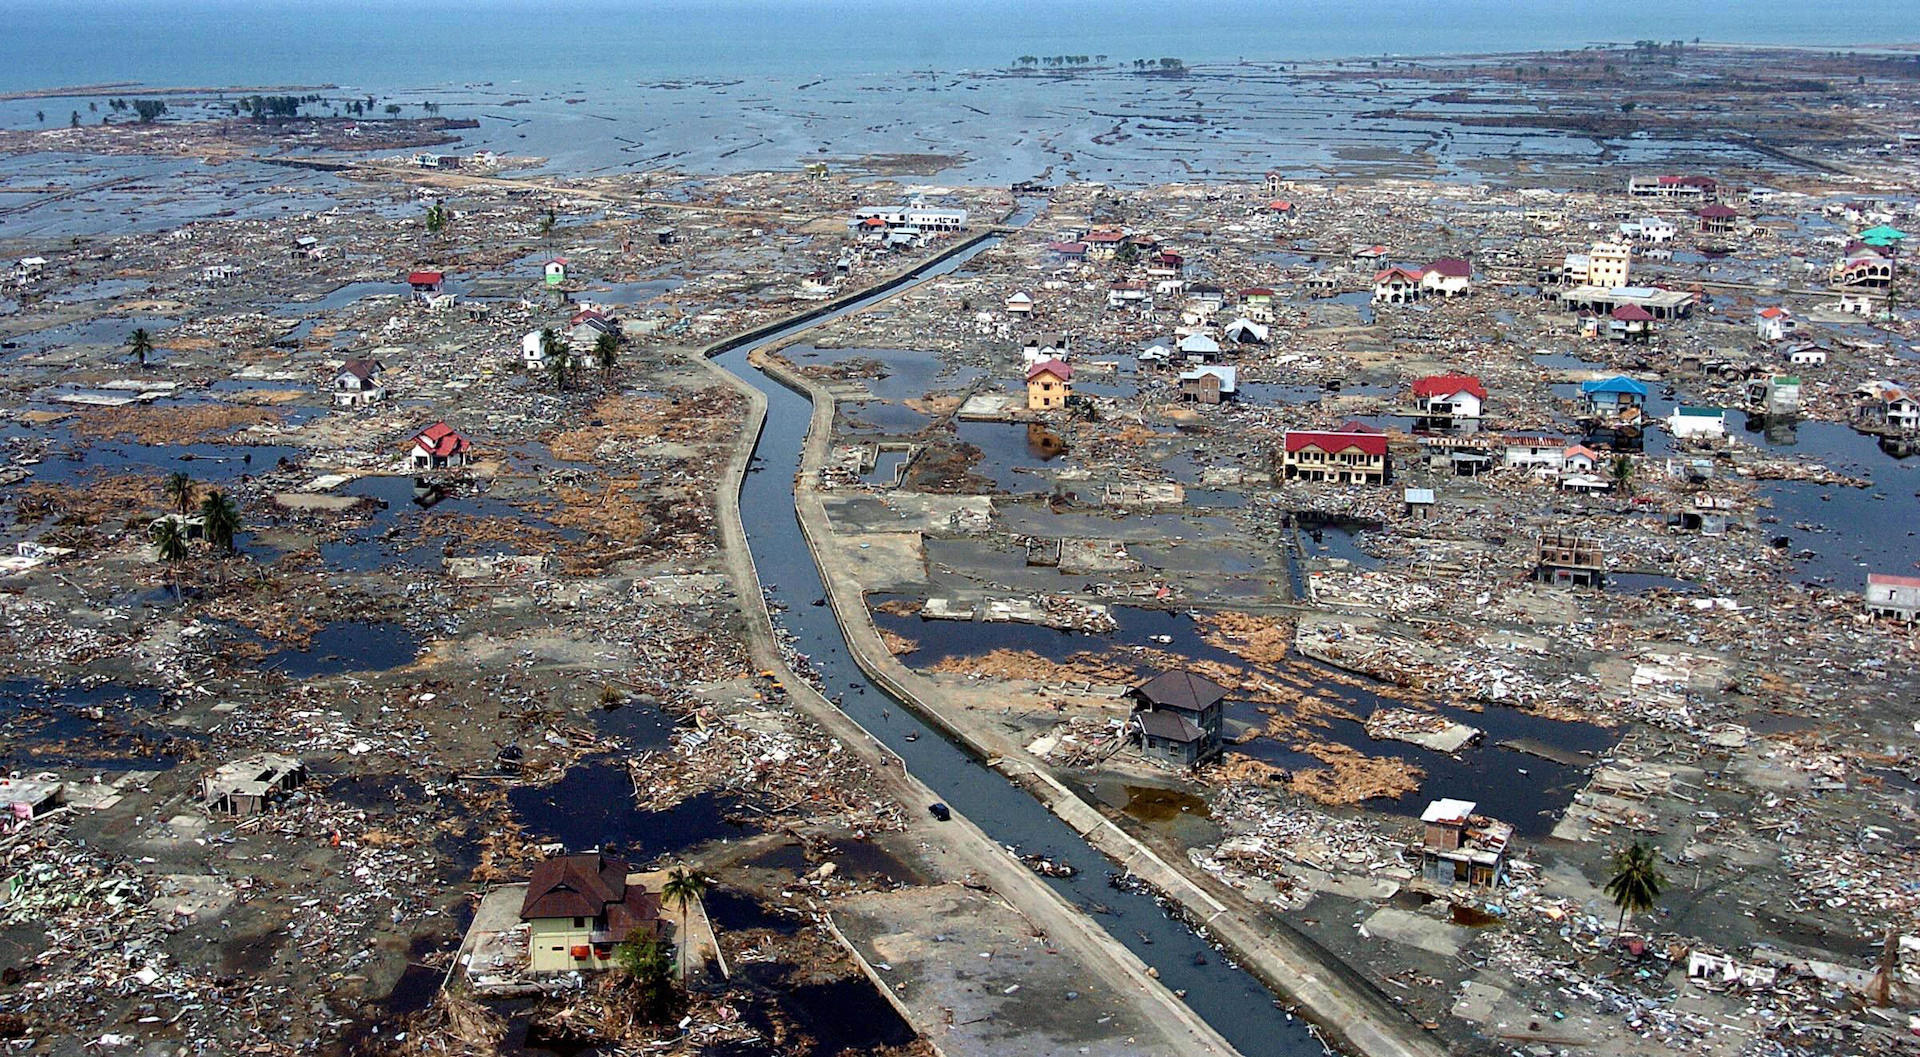 Aerial view of destruction caused by the 2004 tsunami that hit Indonesia.